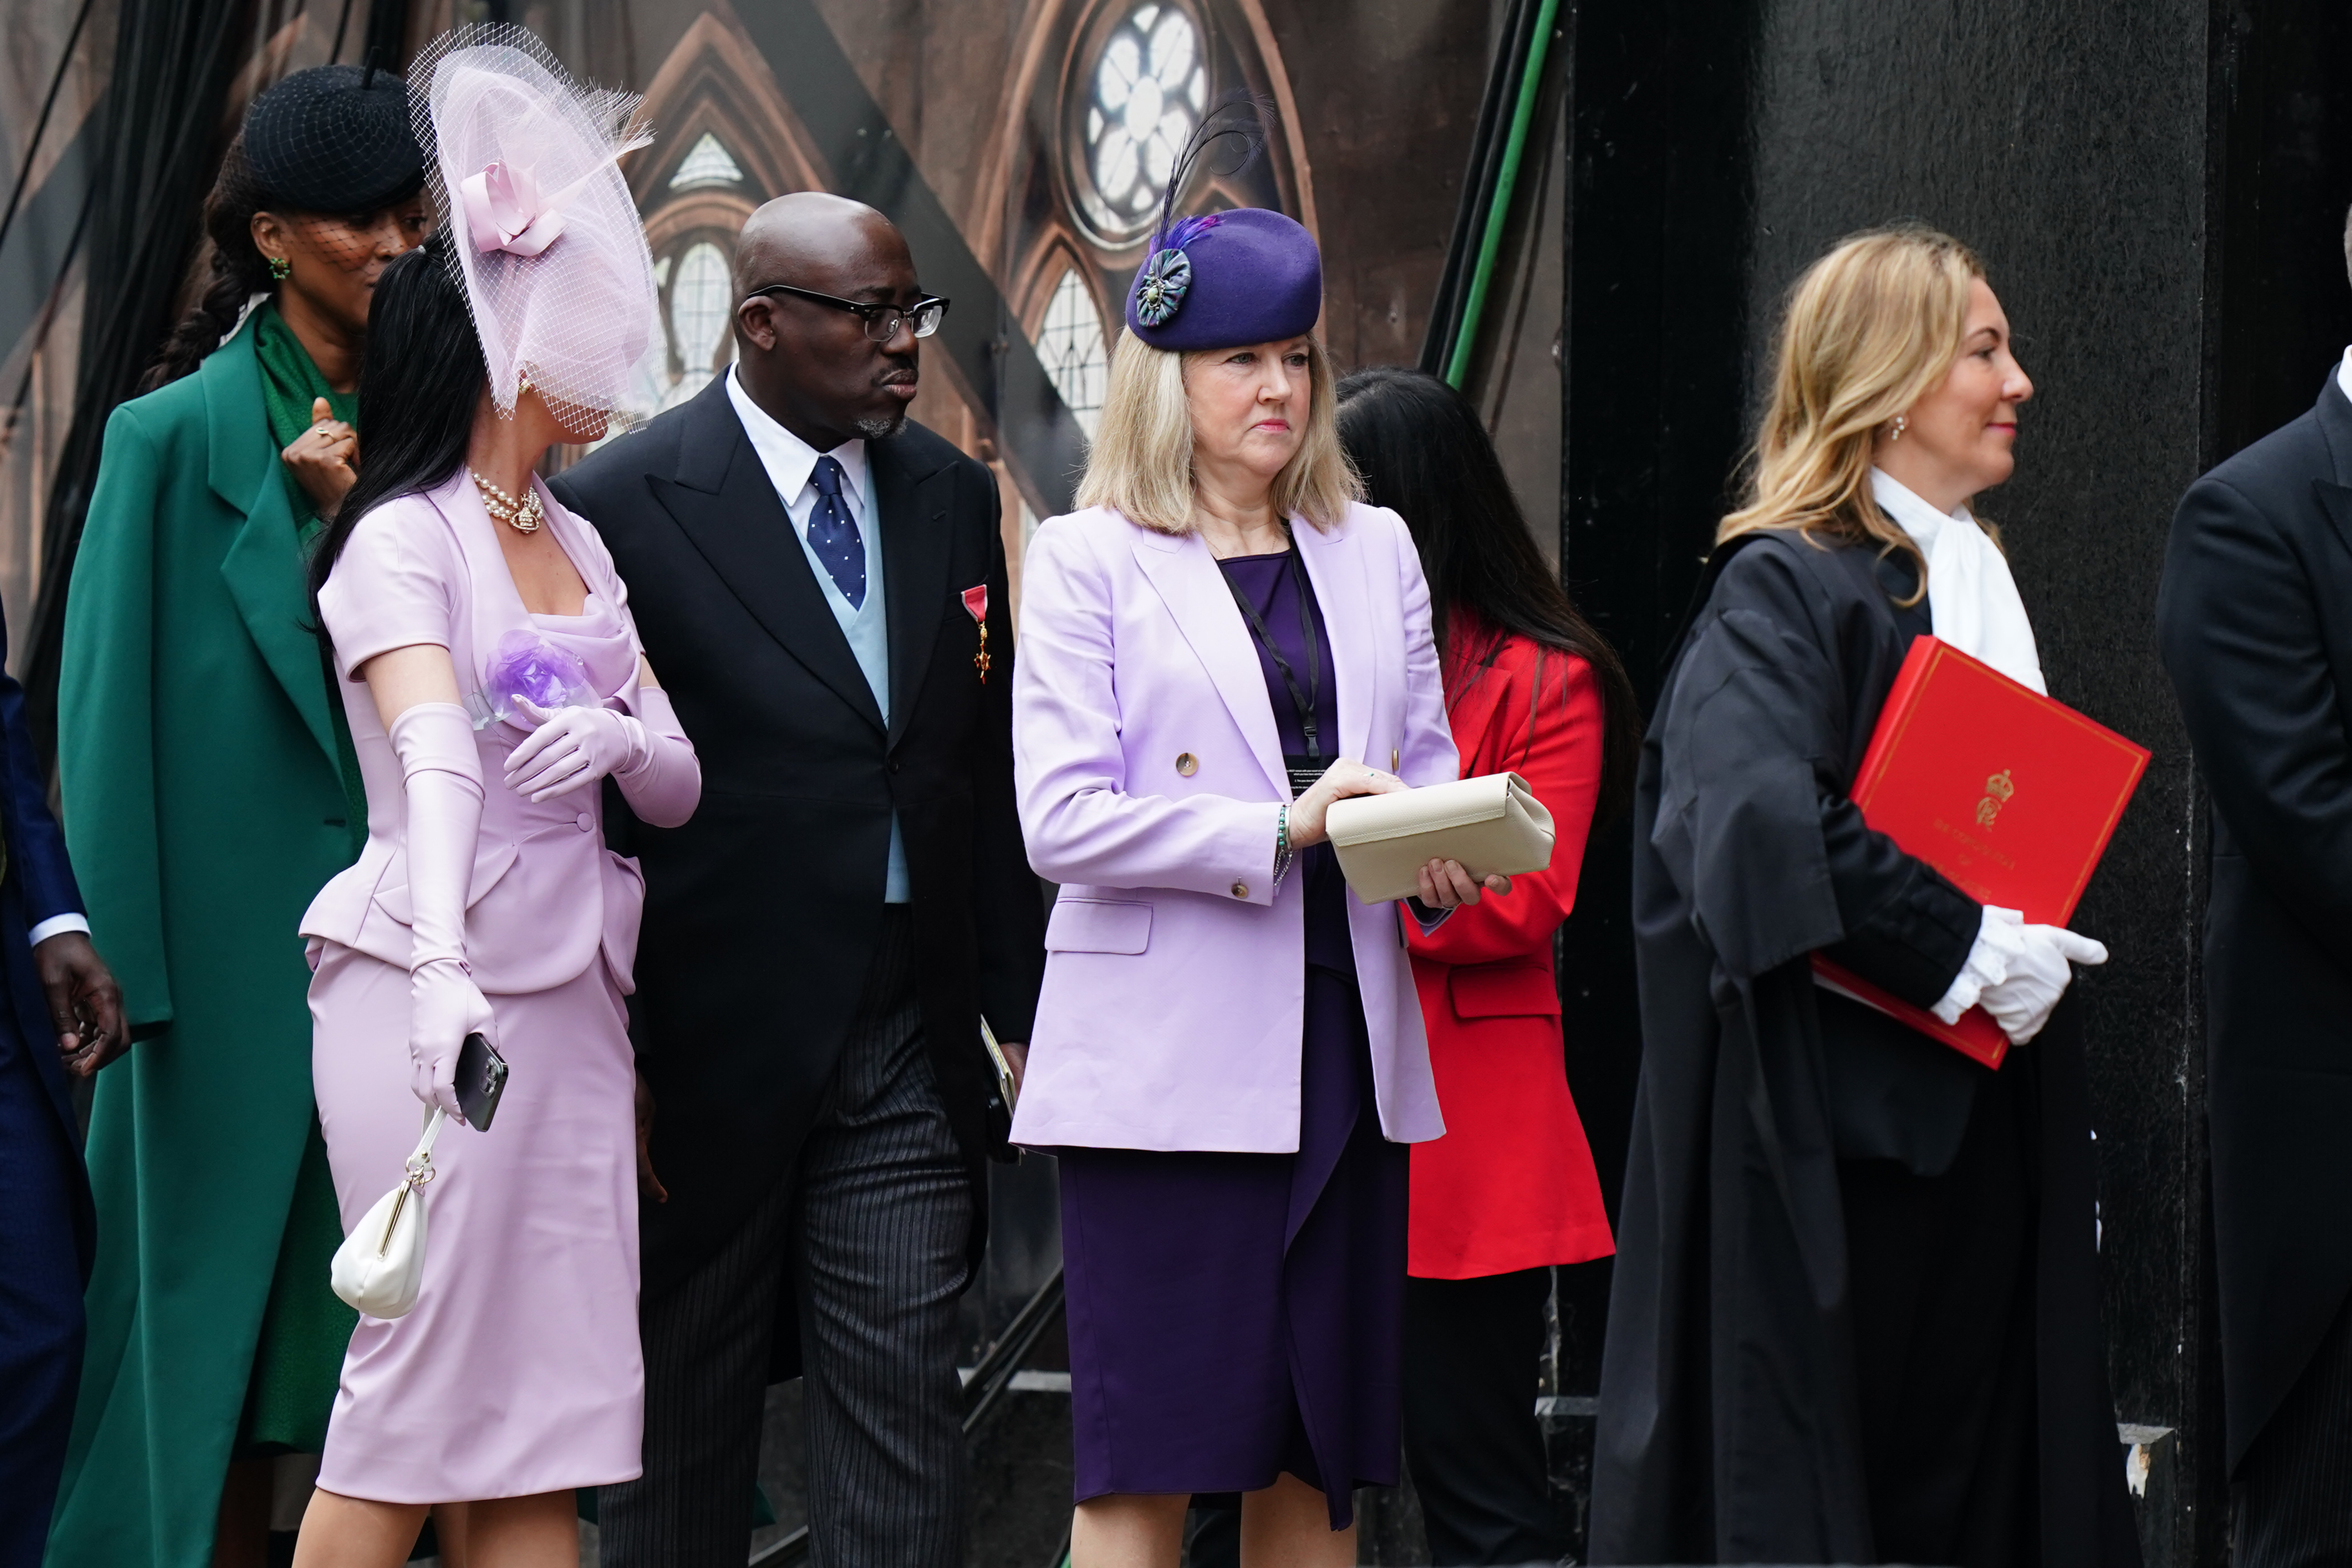 Katy Perry (second from left) and Edward Enninful (third from left) 